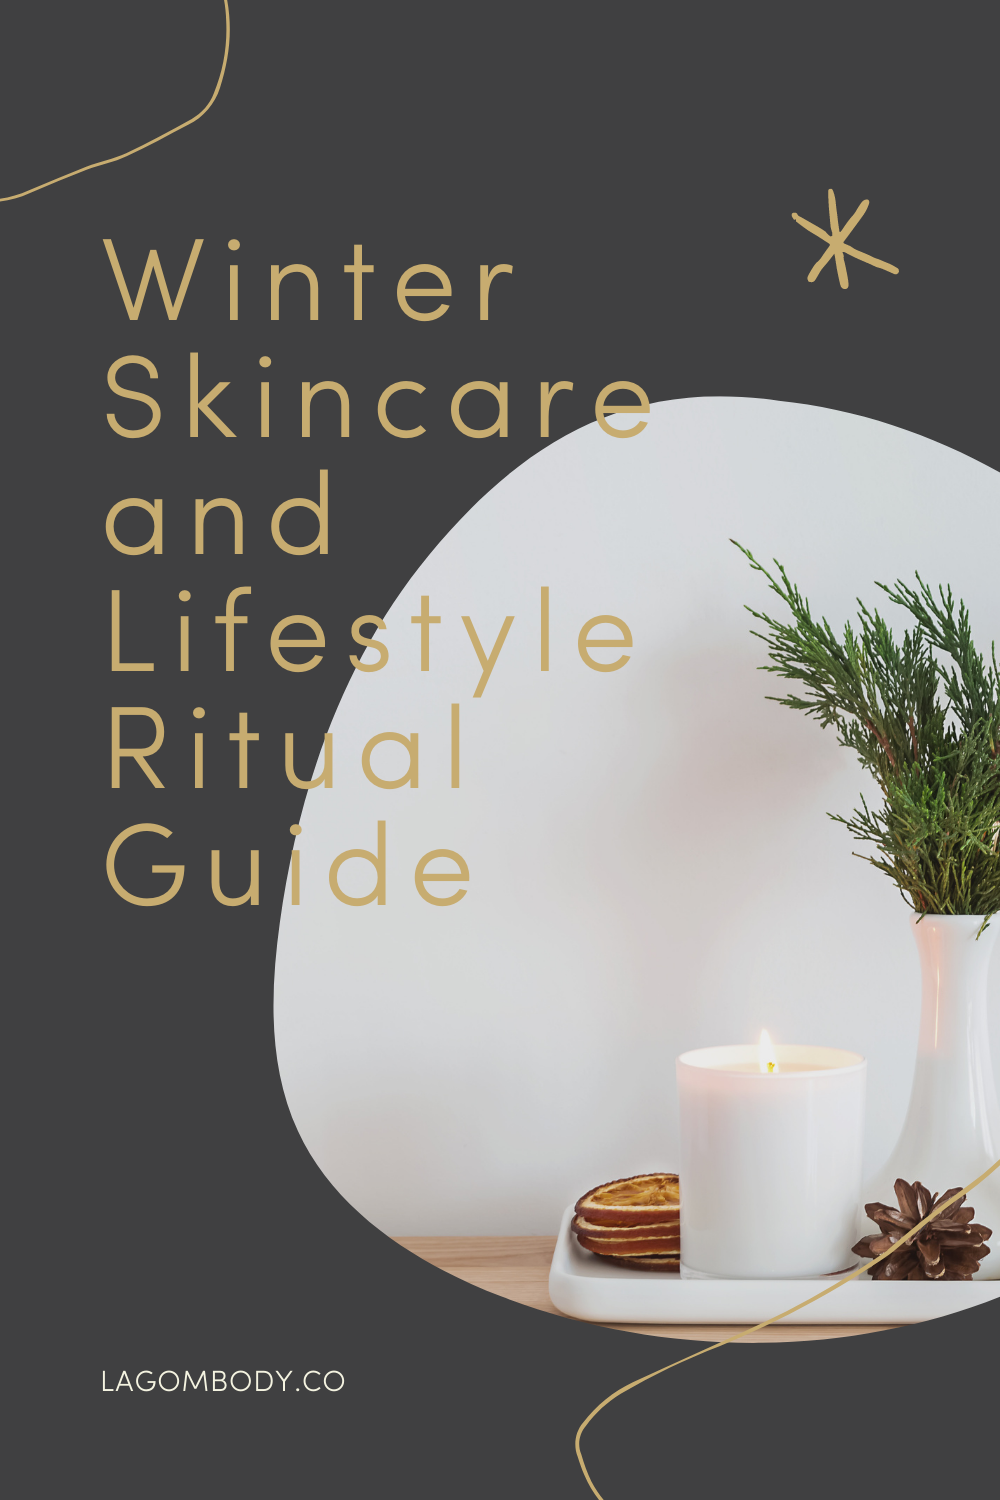 Winter Skincare and Lifestyle Guide Promo Image